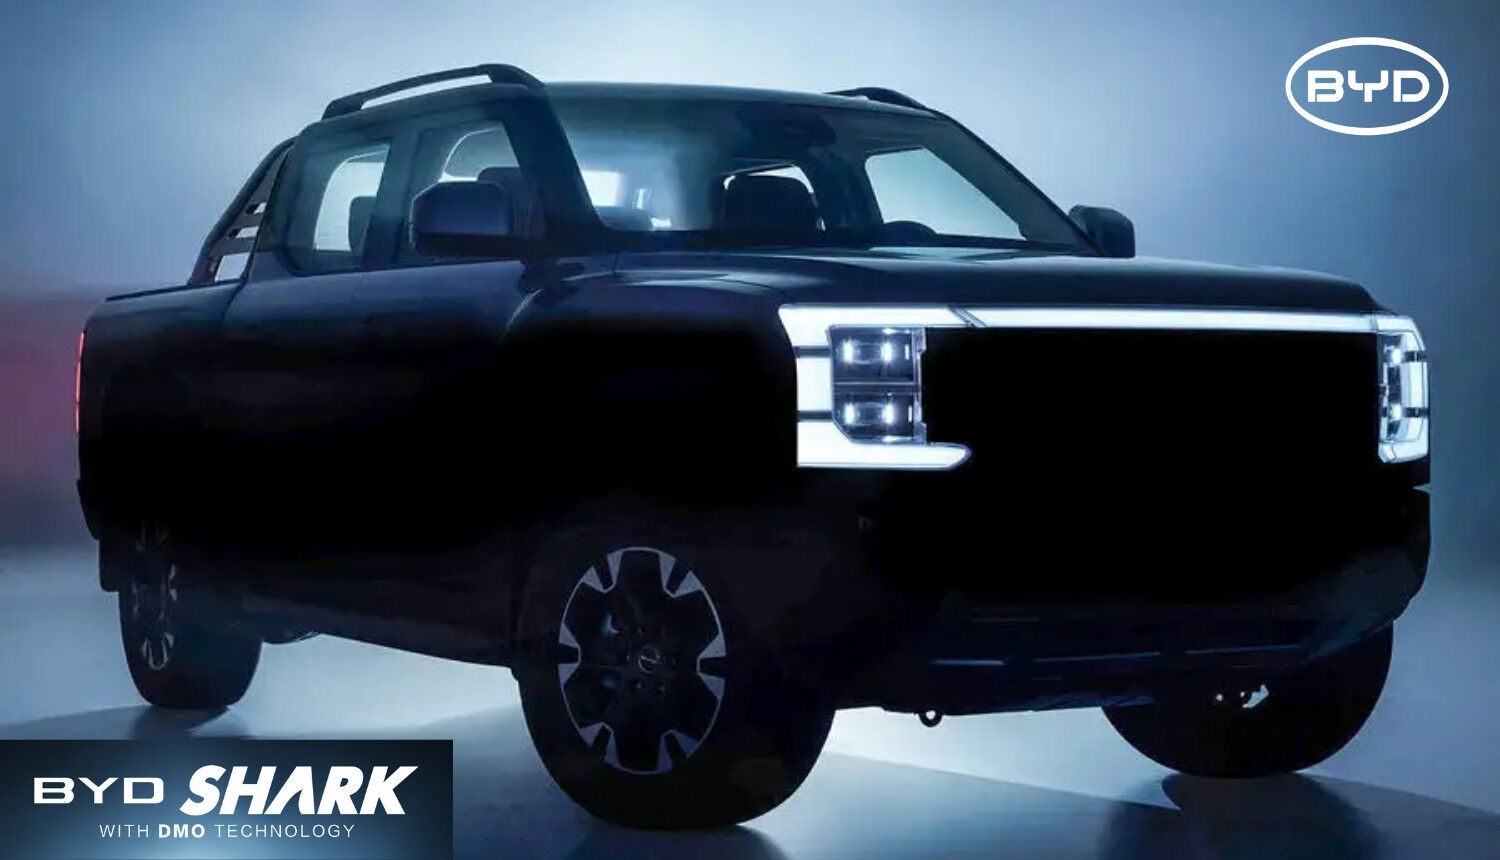 BYD names new electric pickup truck BYD Shark